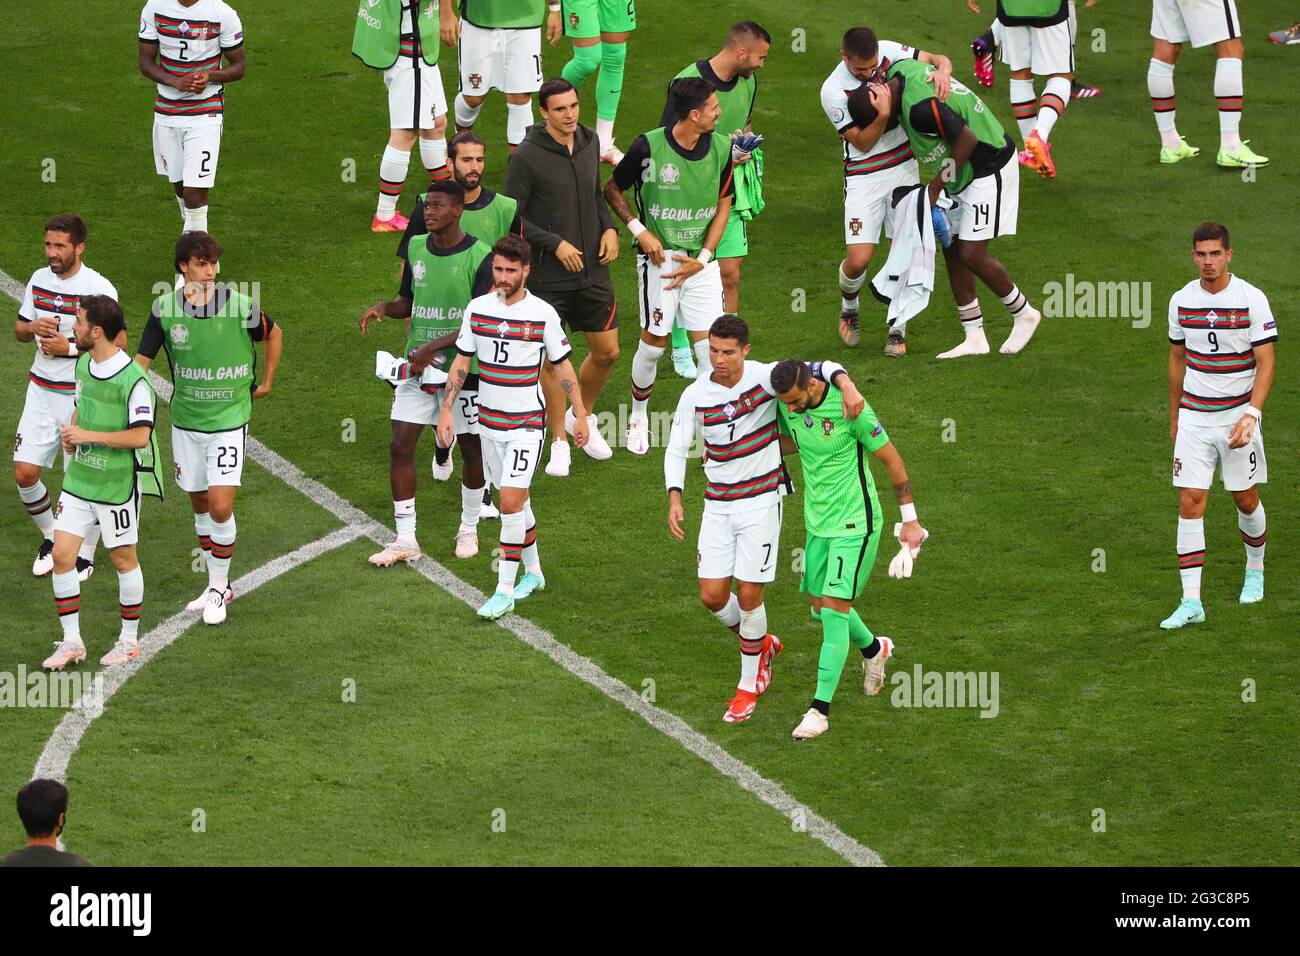 BUDAPEST, HUNGARY - JUNE 15: Portuguese player Cristiano Ronaldo (7) and Rui Patrício (1) leave the pitch after beating Hungary (3:0) at the UEFA Euro 2020 Championship Group F match between Hungary and Portugal on June 15, 2021 in Budapest, Hungary. (Photo by MB Media) Stock Photo